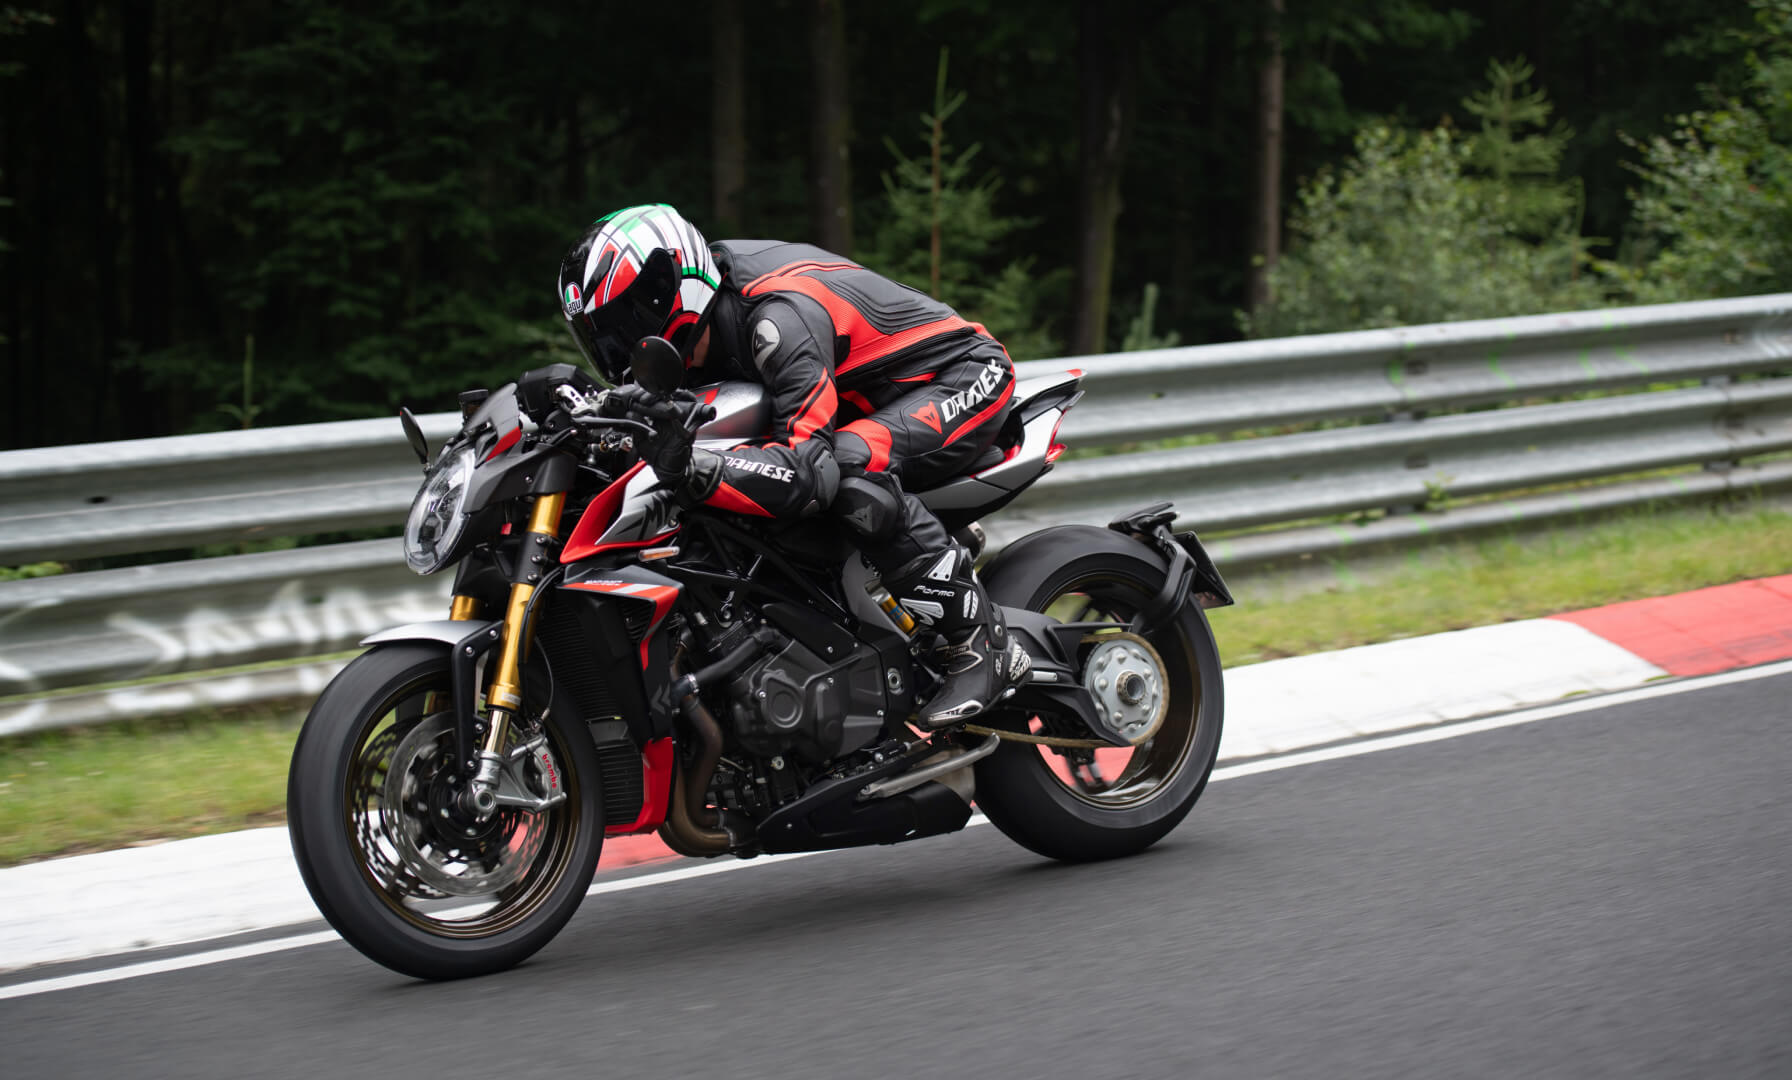 A shot of a rider on the MV Agusta Brutale 1000 Nürburgring at the track